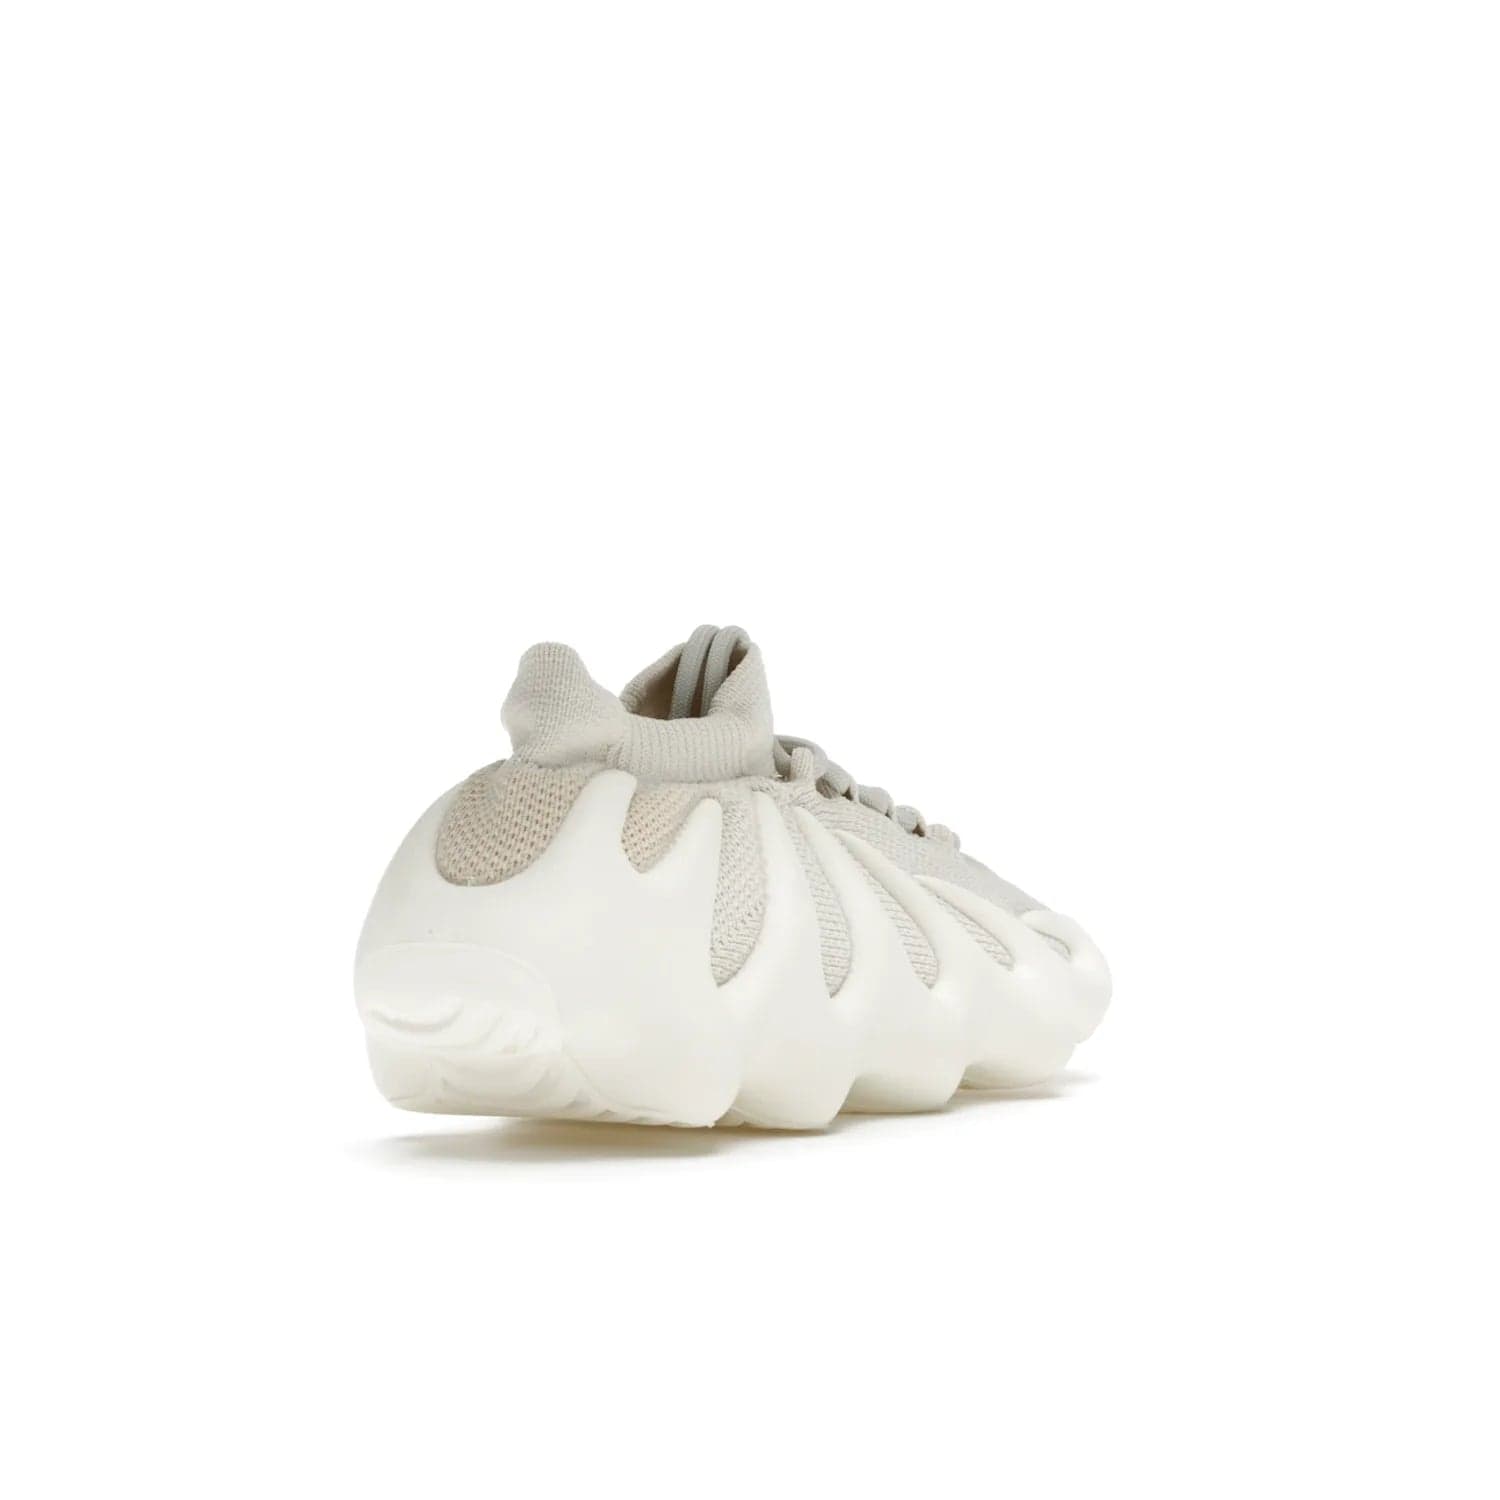 adidas Yeezy 450 Cloud White - Image 31 - Only at www.BallersClubKickz.com - Experience the future with the adidas Yeezy 450 Cloud White. A two-piece design featuring an extreme foam sole and mesh upper, this silhouette is expected to release in March 2021. Get your hands on this striking Cloud White/Cloud White colorway and stand out in the crowd.